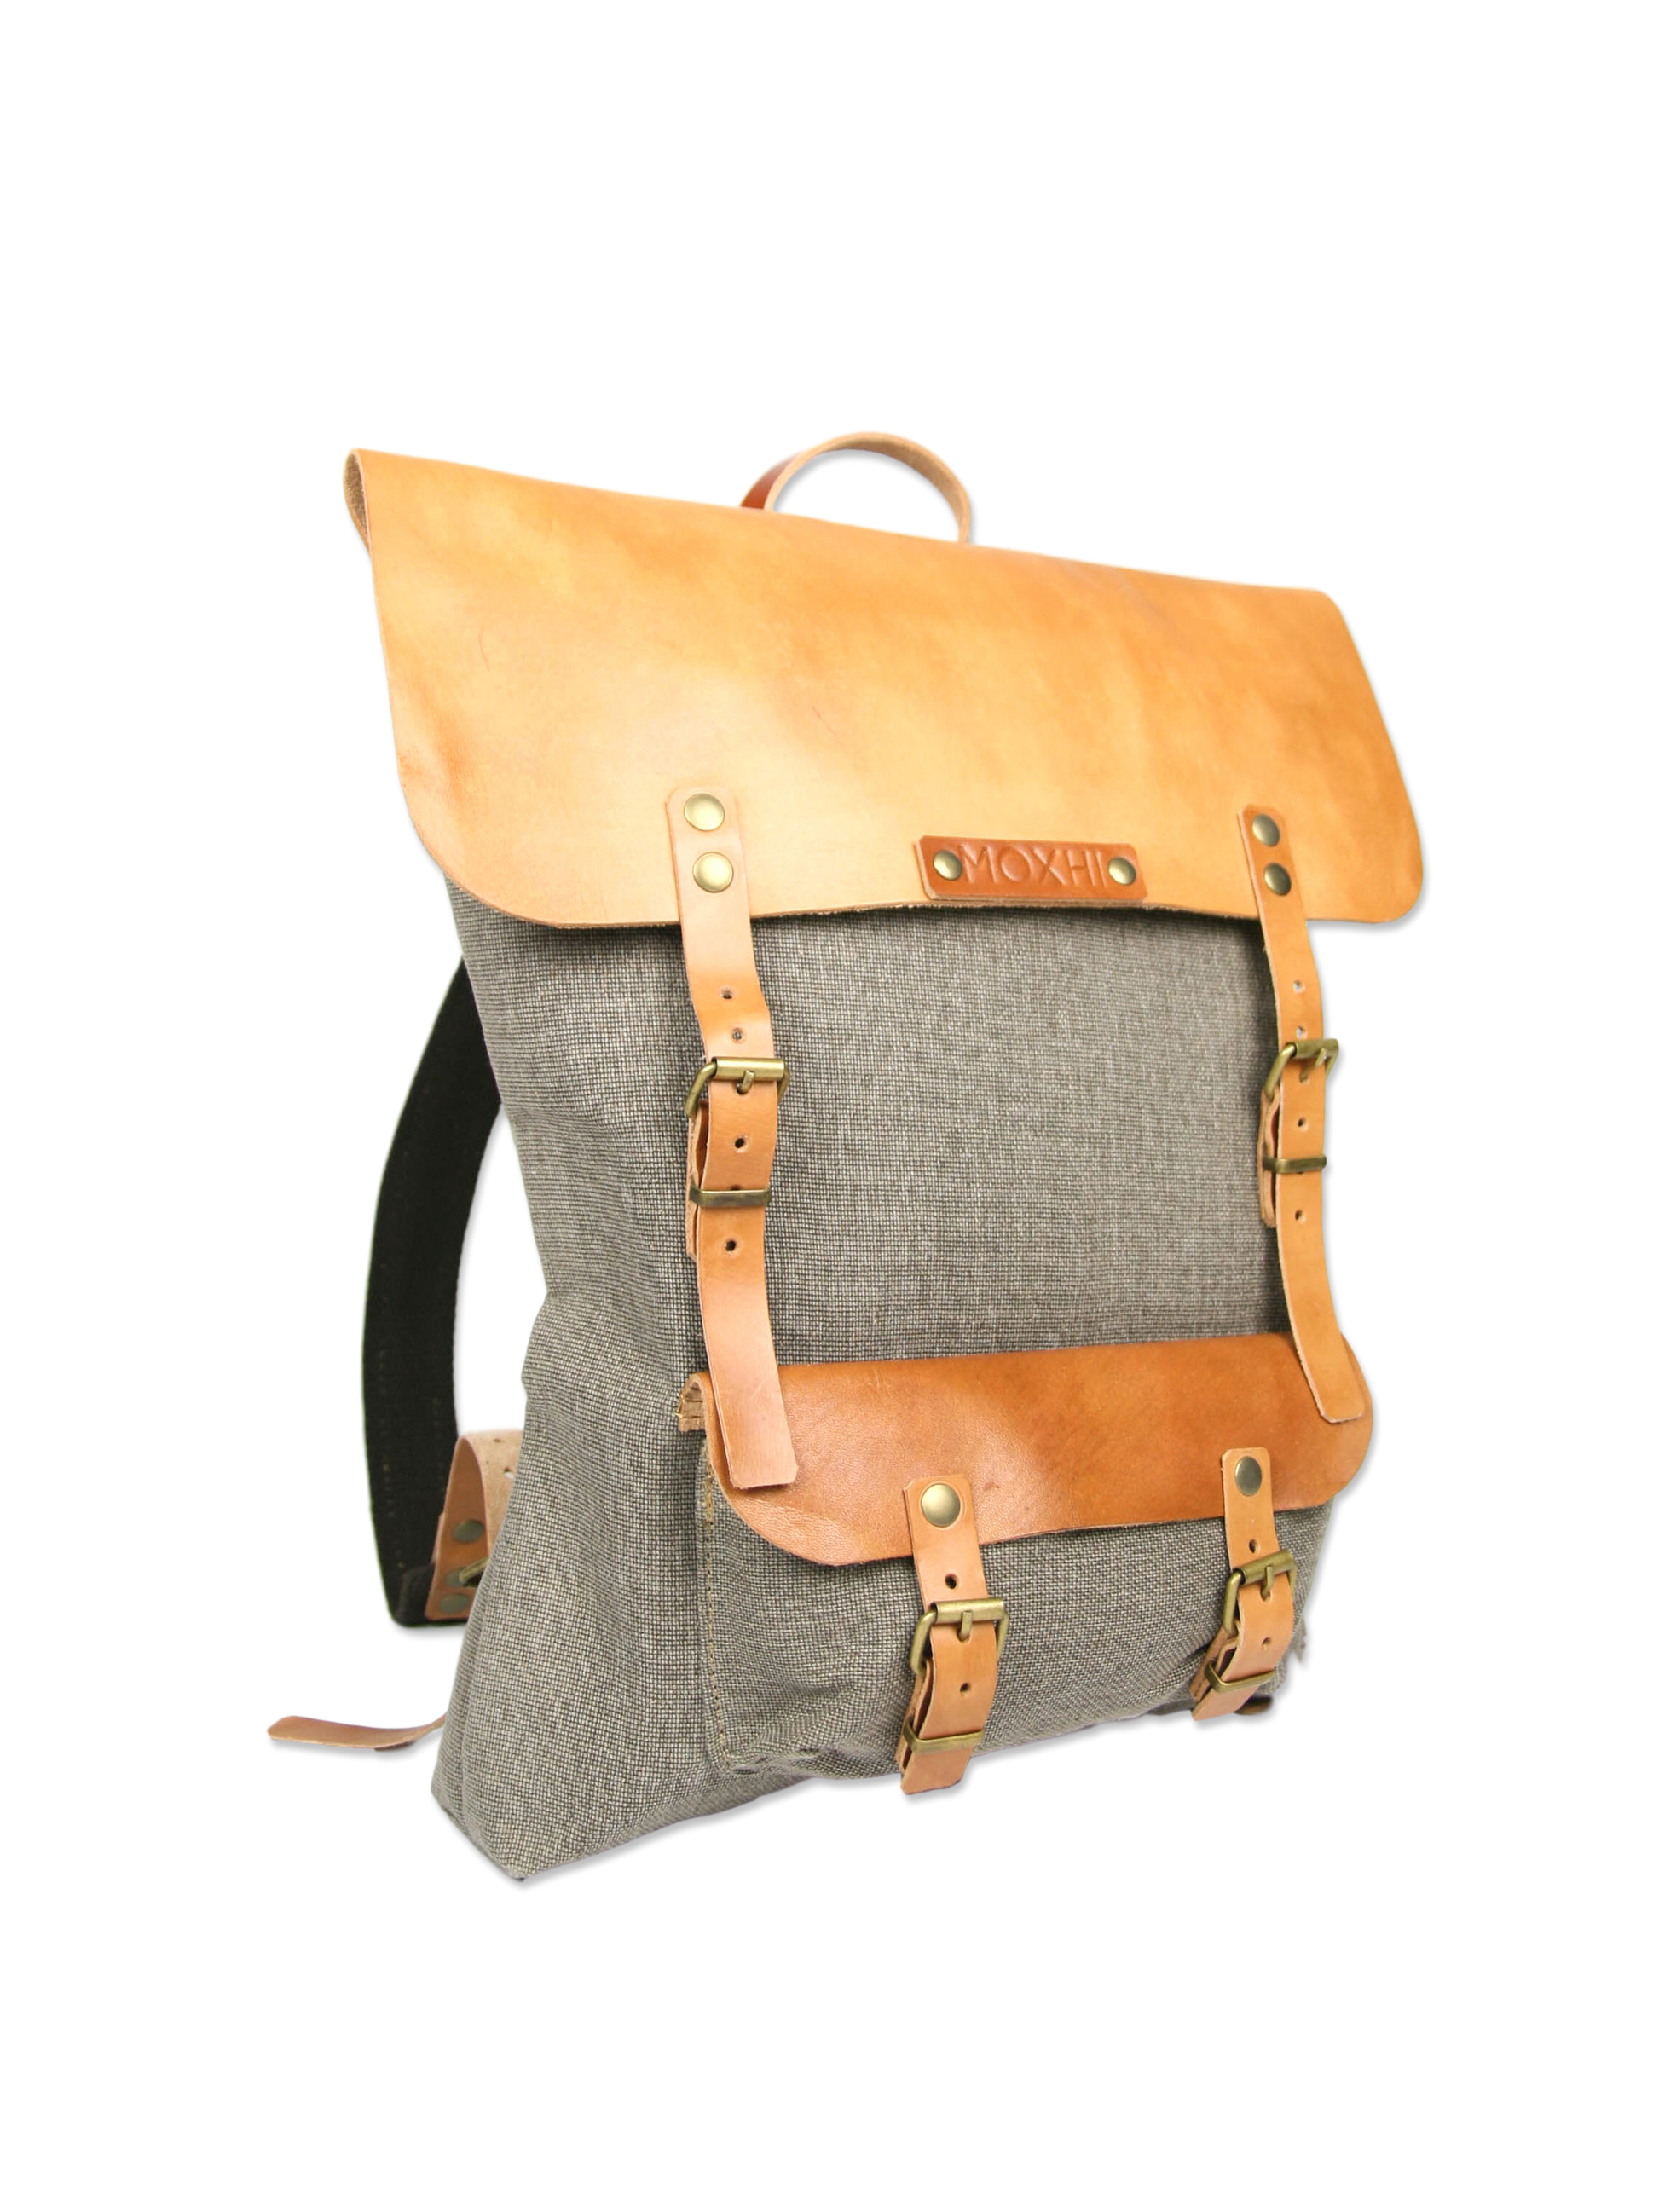 Beautiful handmade backpack leather cotton